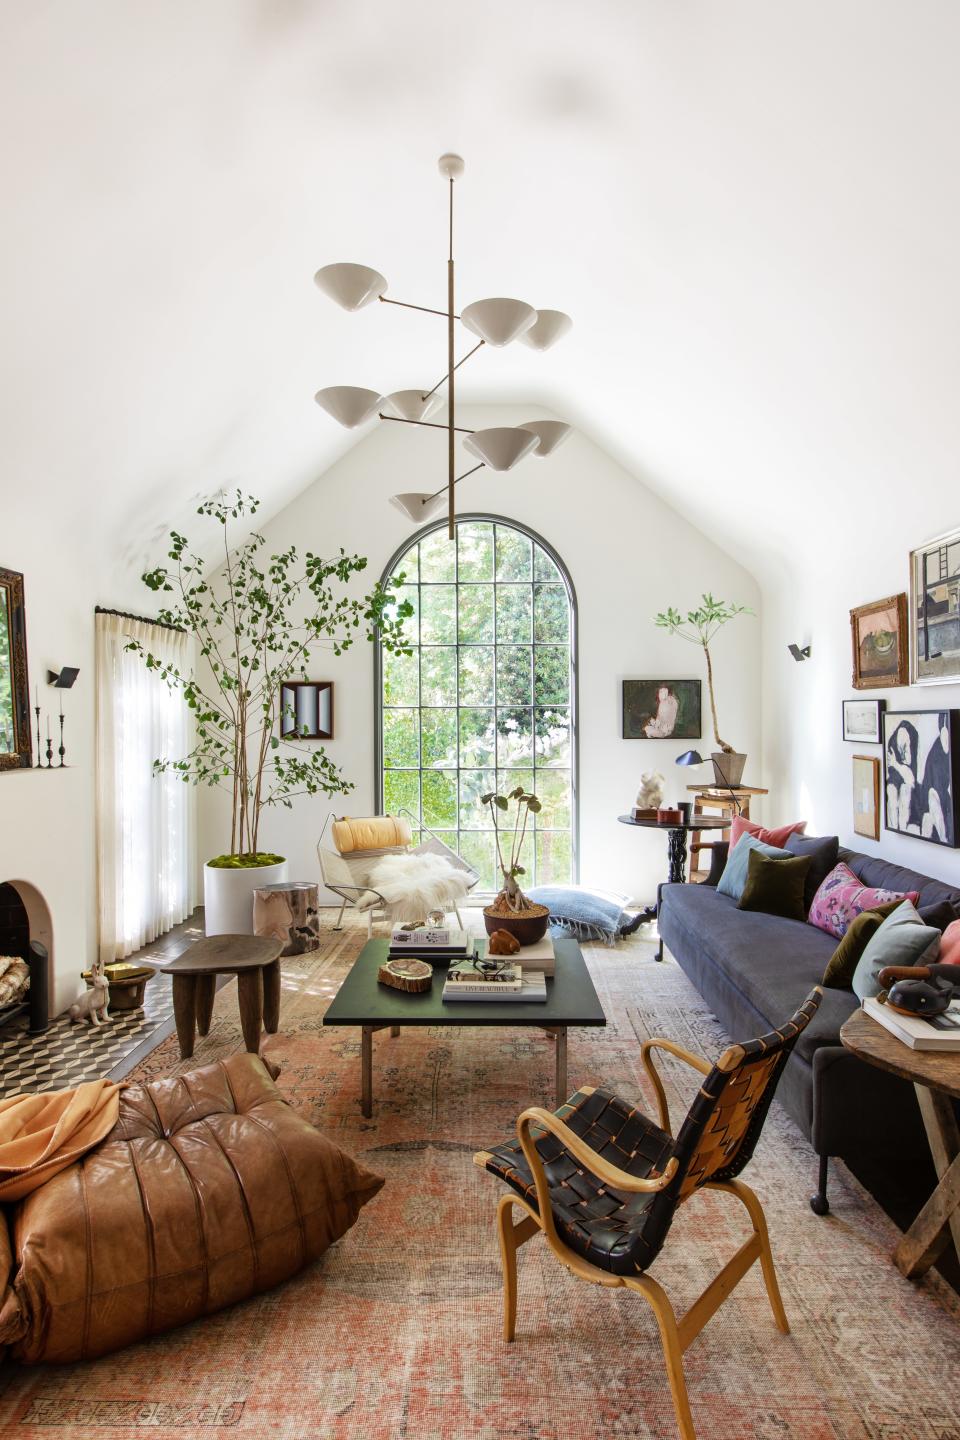 In the living area of a 1920s Tudor home in San Marino, California, Carter Design brought in an eclectic mix of old and new, including a 1920s Khotan rug, a custom BDDW sofa, a Poul Kjaerholm coffee table, and chairs by Hans Wegner, Bruno Mathsson, and Ligne Roset. The gallery wall combines 19th-century paintings with drawings by the clients’ children.